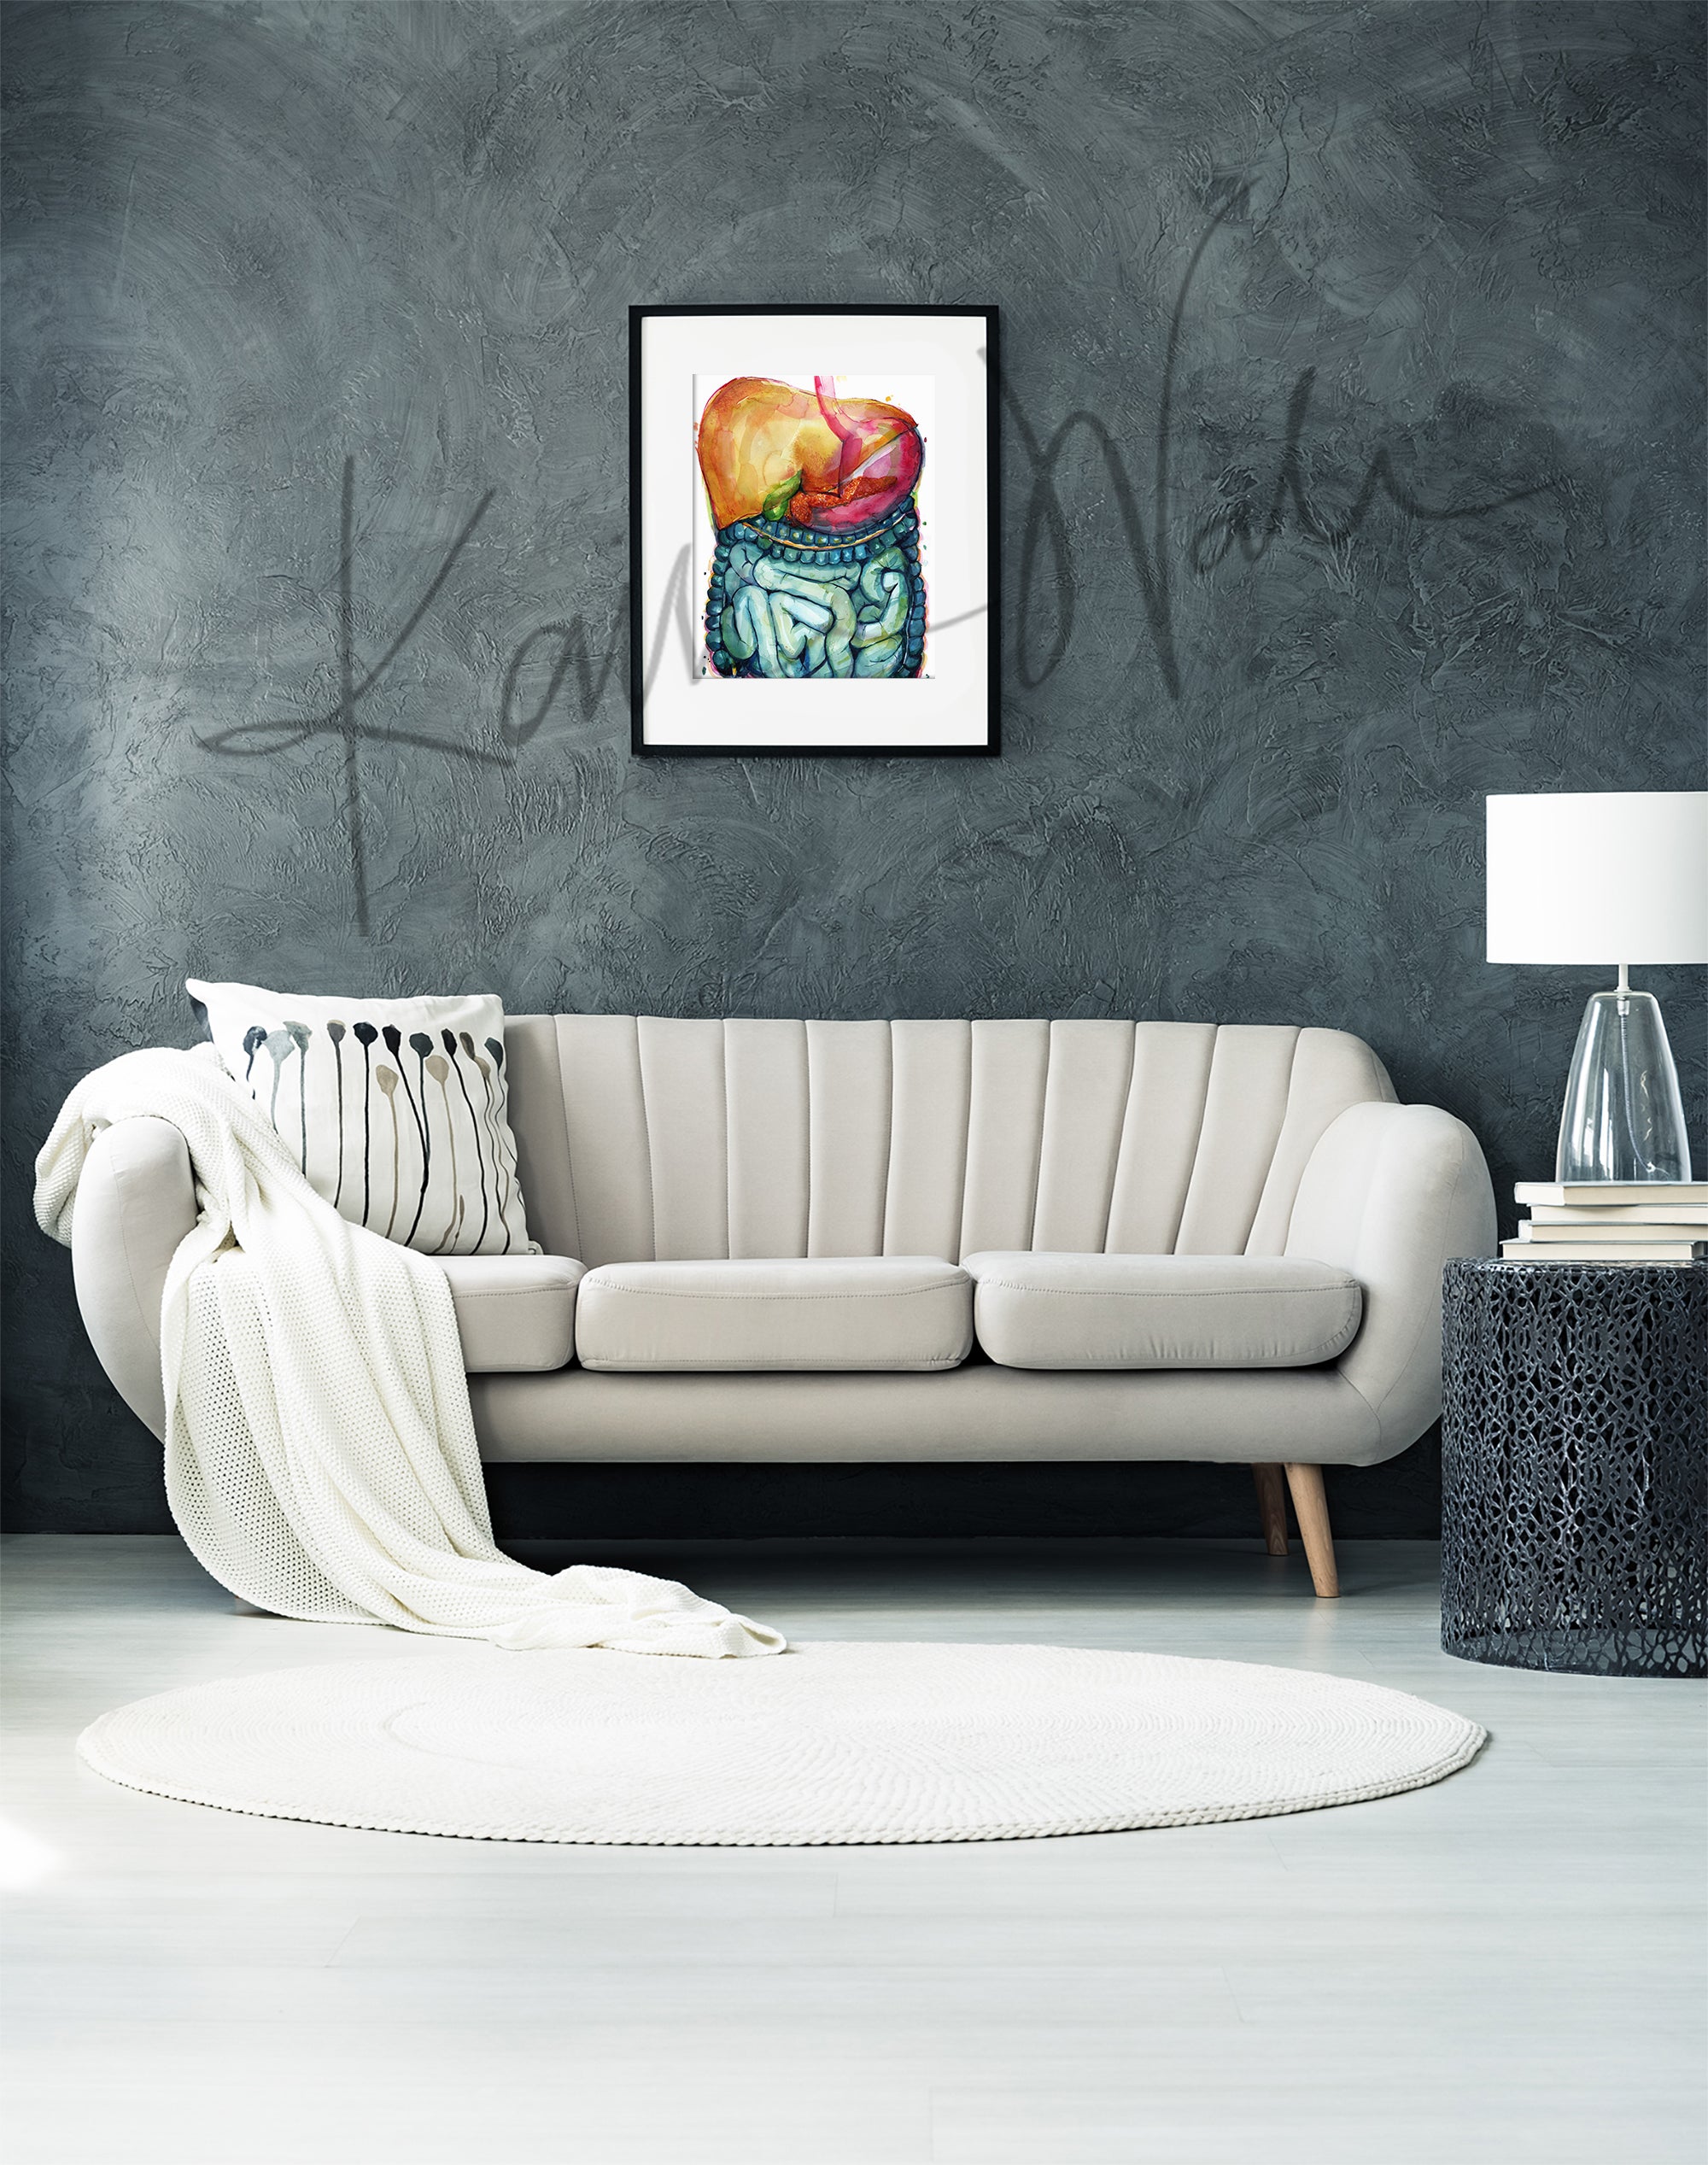 Framed watercolor painting of the gastrointestinal system. The painting is hanging over a beige couch.